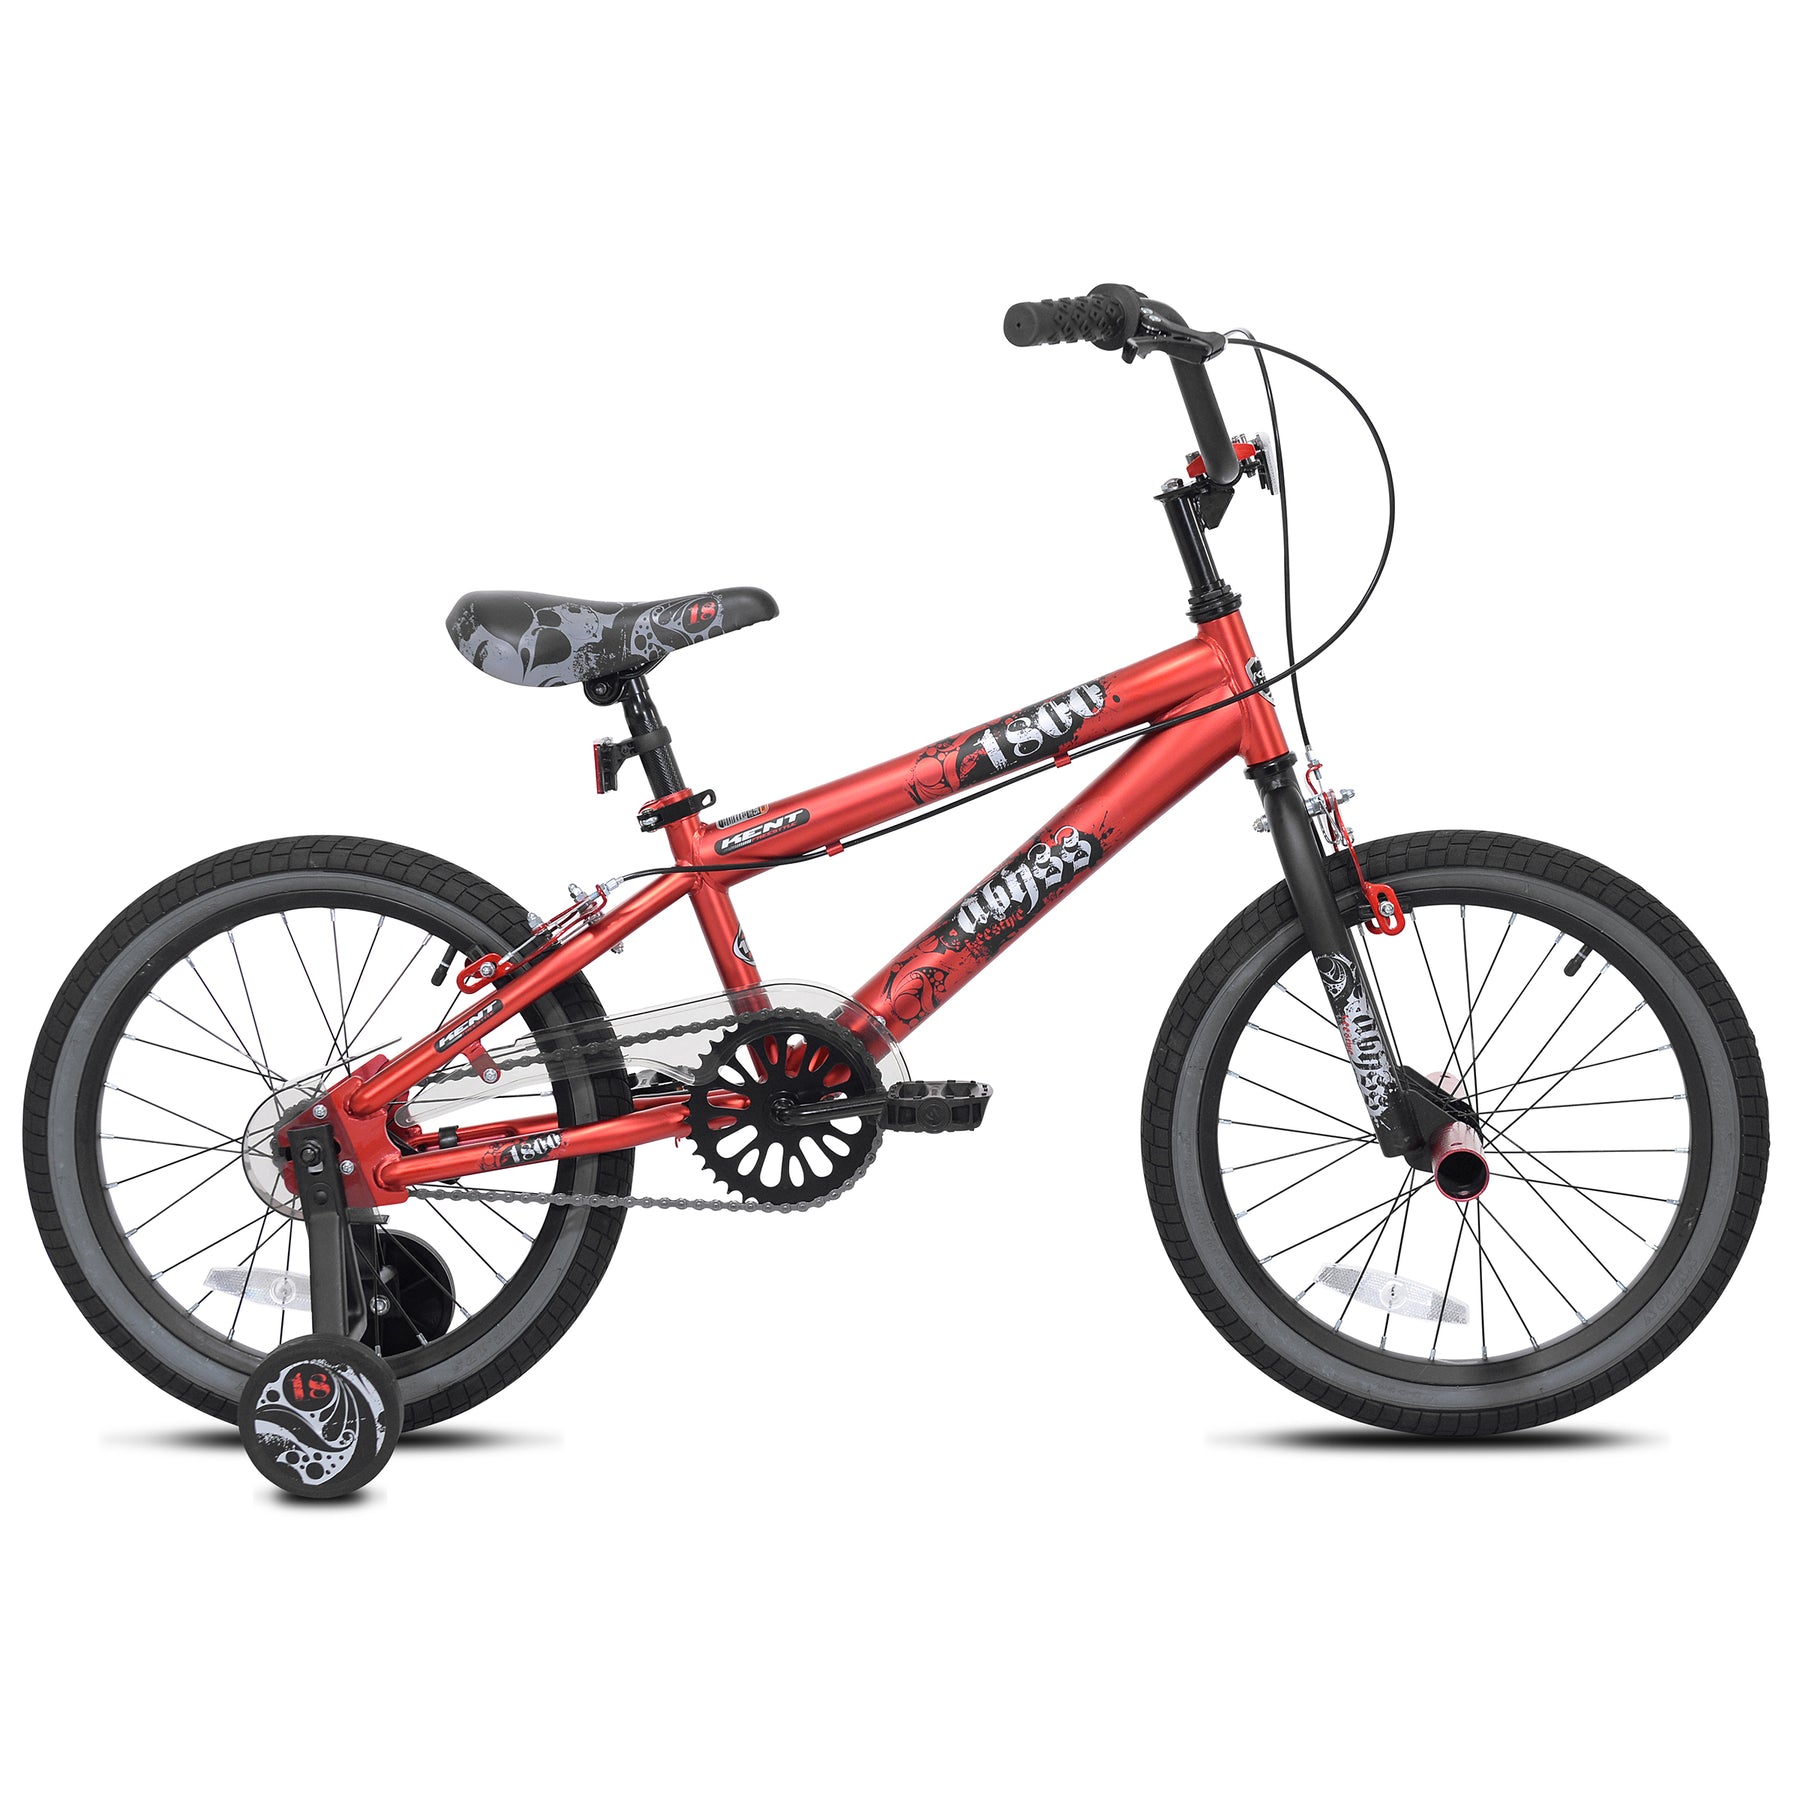 18" Kent Abyss | Bike for Kids Ages 5-8